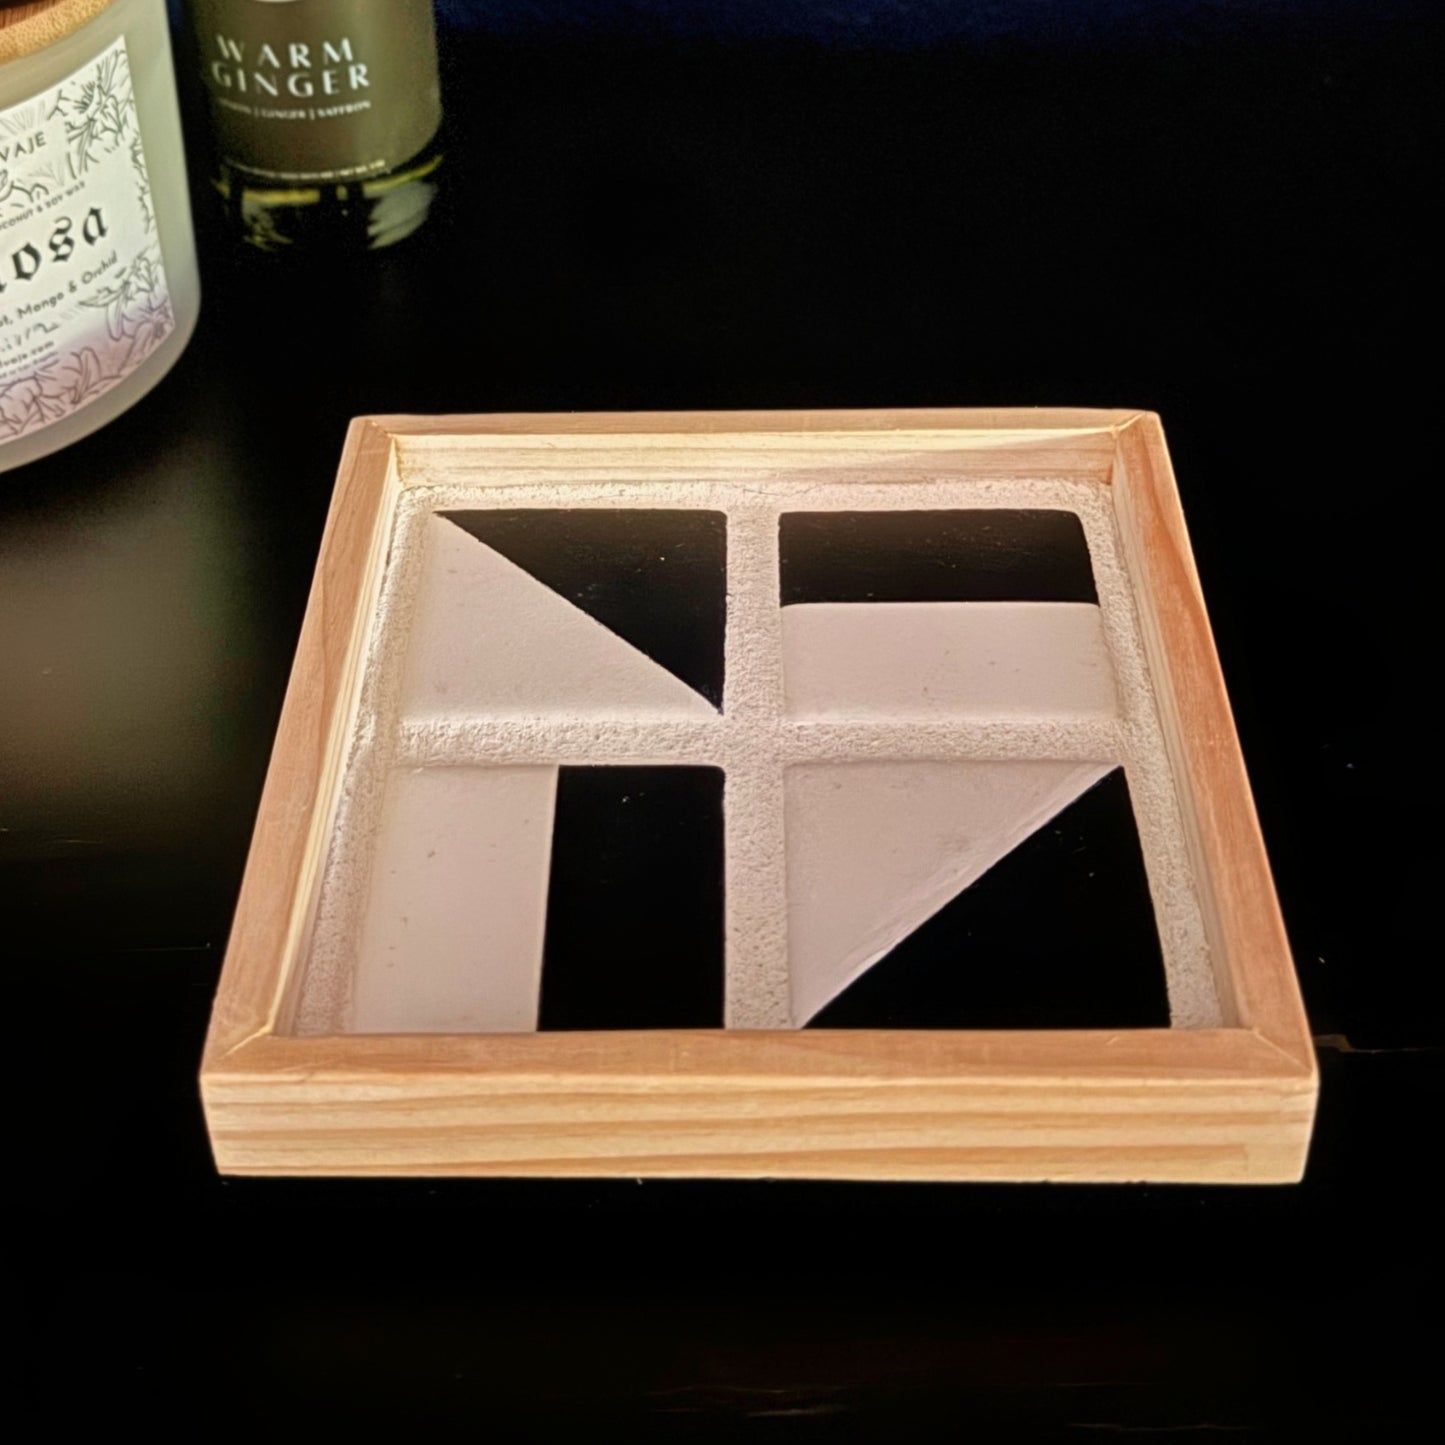 The black and white tile tray with candle and diffuser in the background